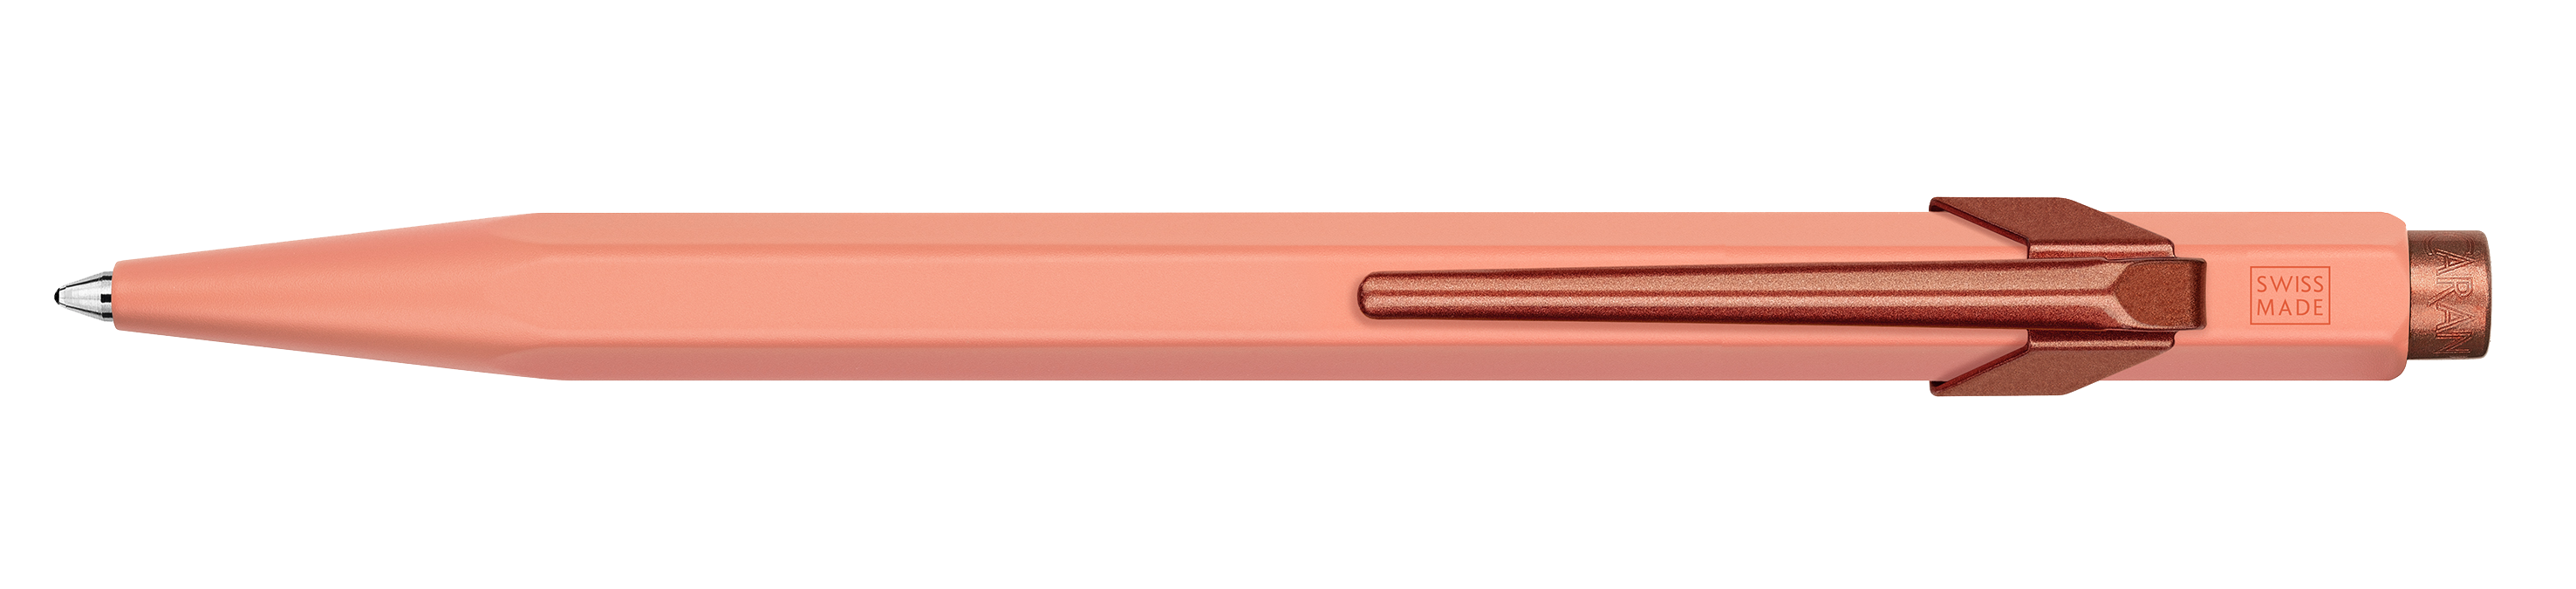 Caran d'Ache 849 Claim Your Style III Limited Edition Tangerine Ballpoint